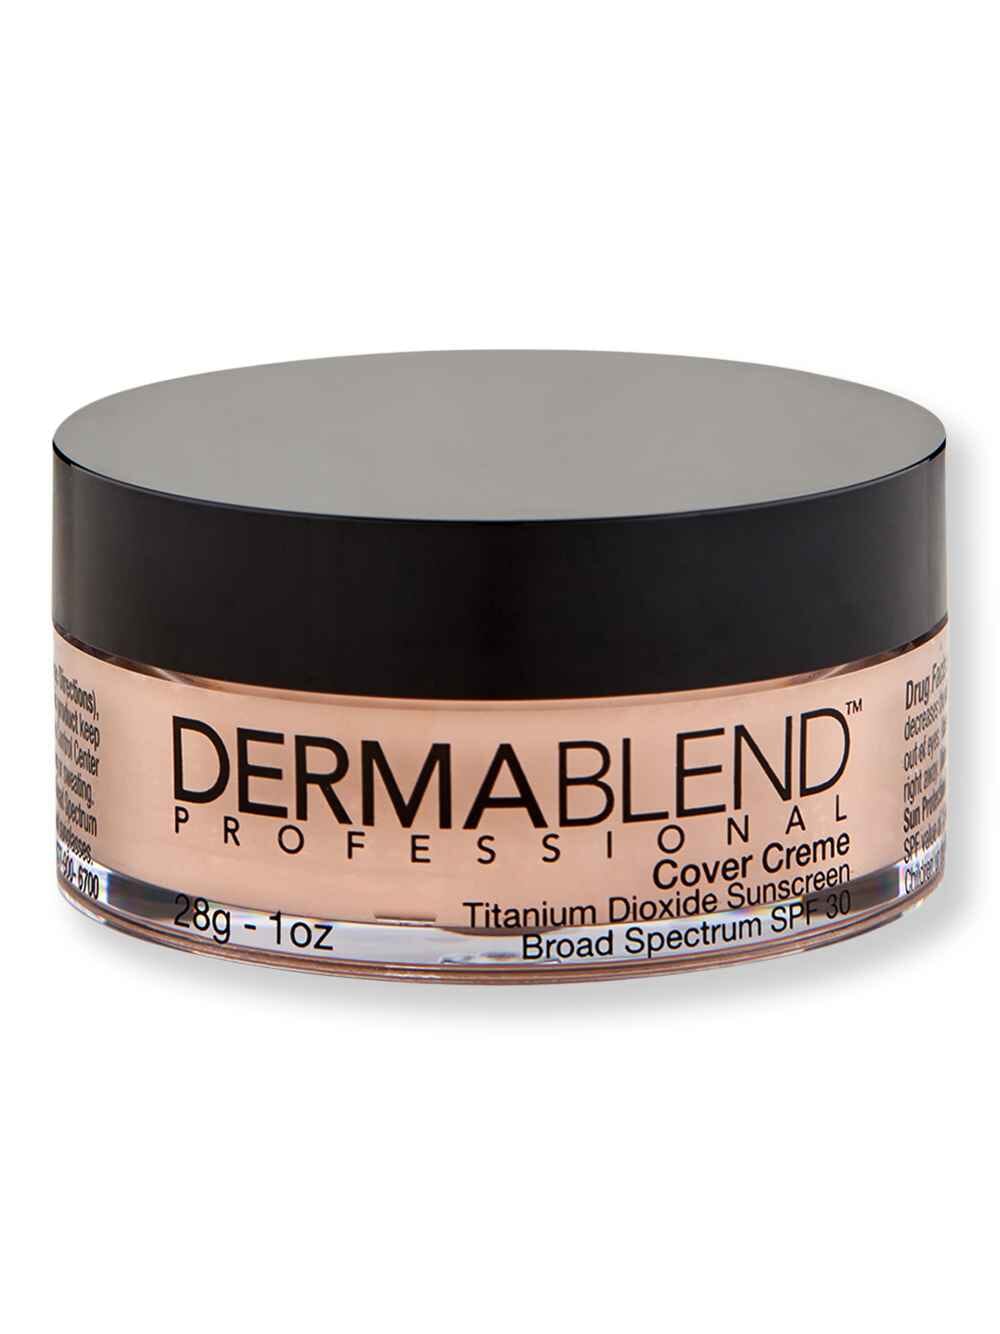 Dermablend Dermablend Cover Creme SPF 30 10C Rose Beige Tinted Moisturizers & Foundations 